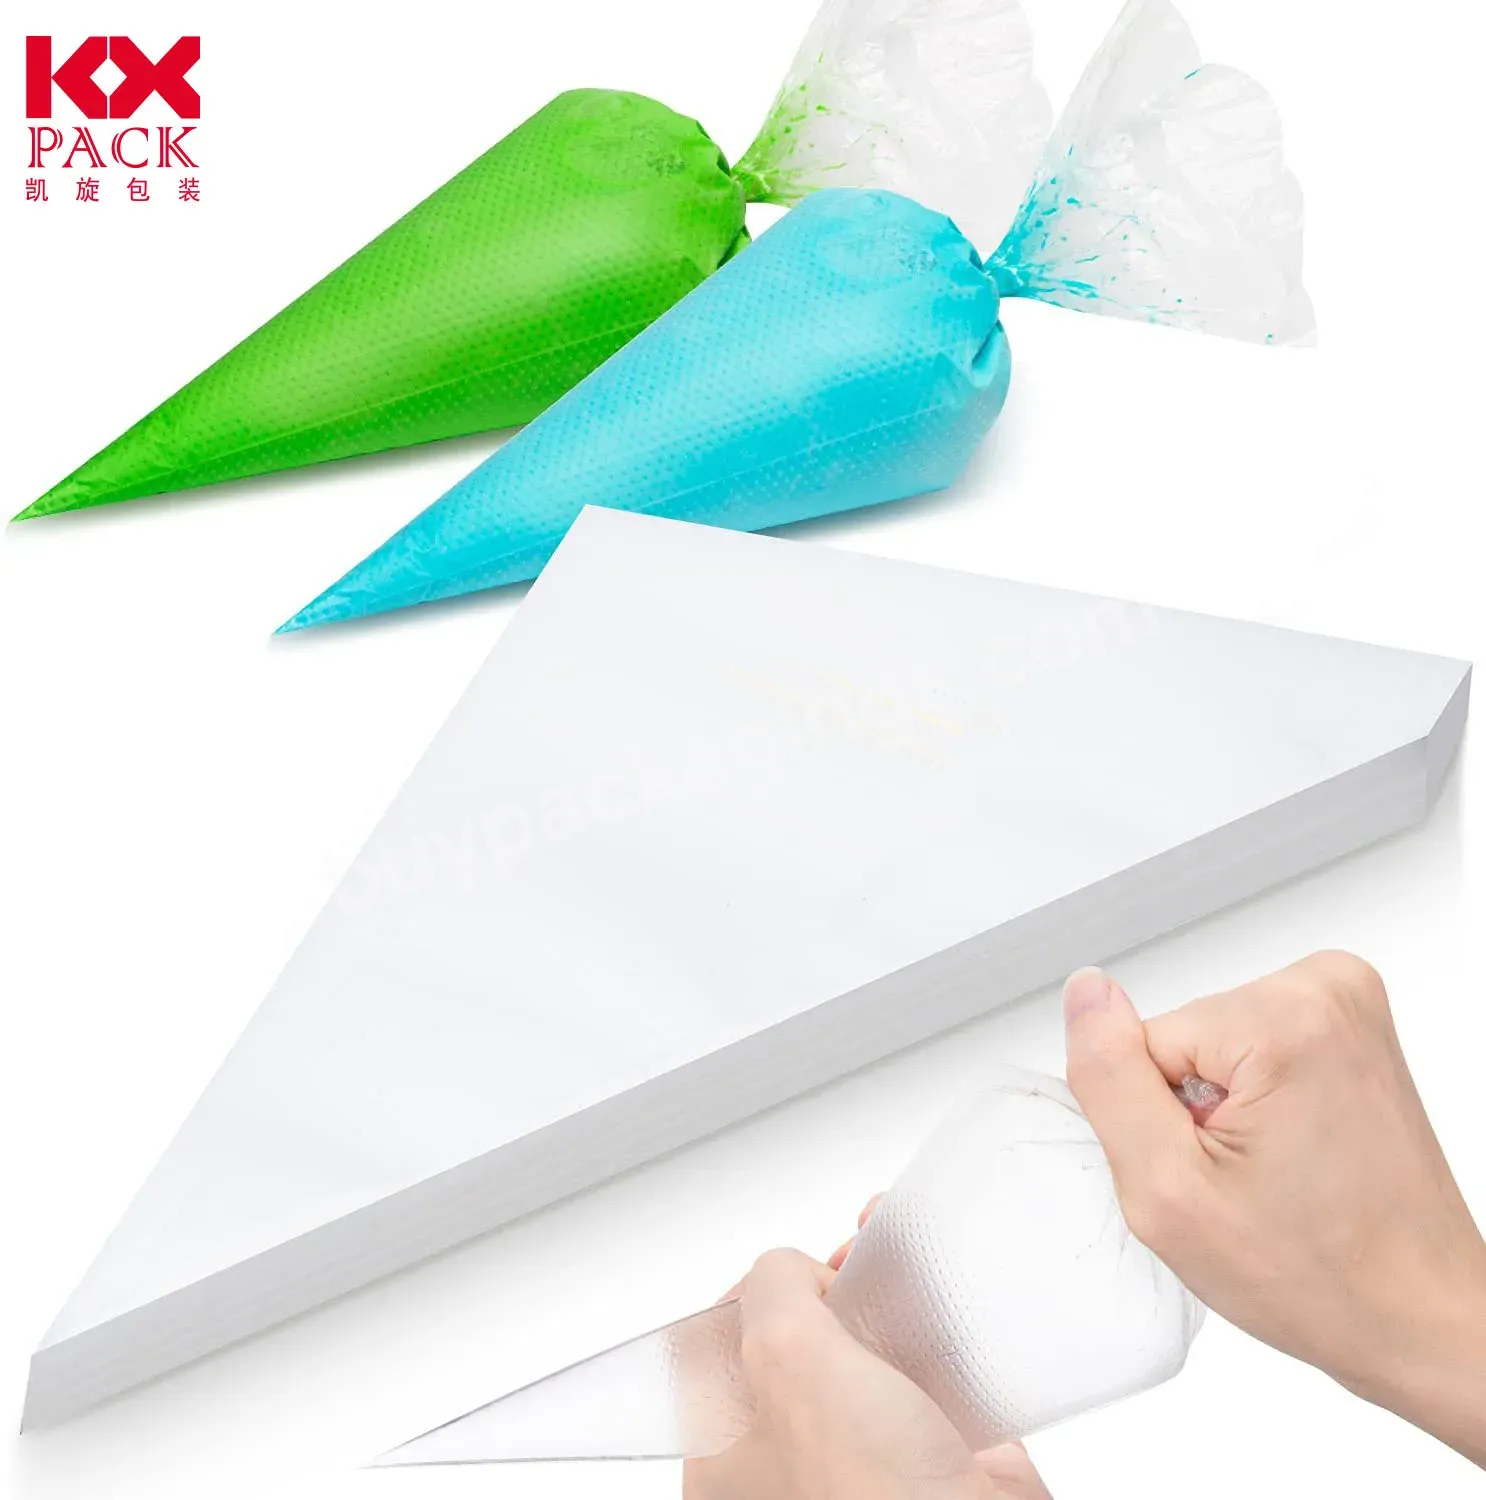 Disposable Pastry Icing Bag For Cake Baking Decorating Supplies Kit Cream Frosting And Cookie Decorating Piping Bags Tips - Buy Piping Bags,Piping Tips,Disposable Pastry Bag.